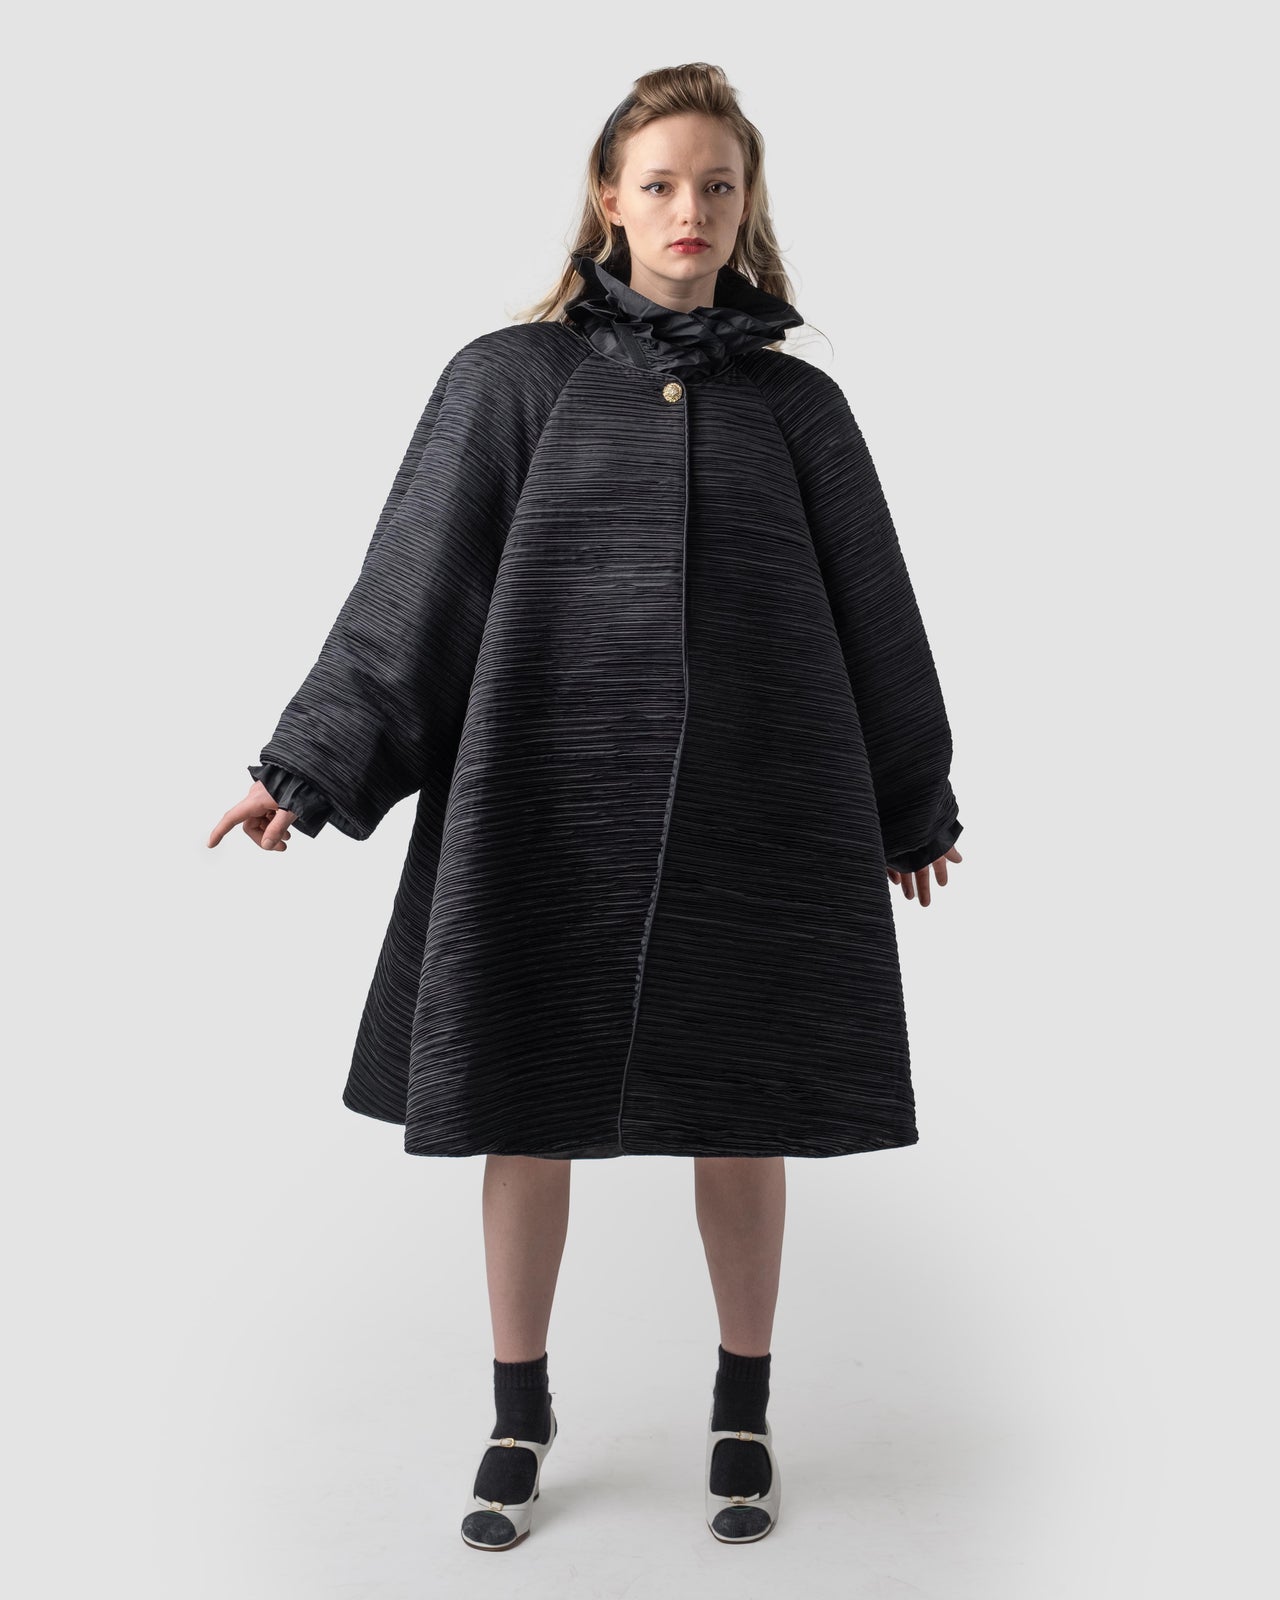 George F. Couture oversized structural evening coat